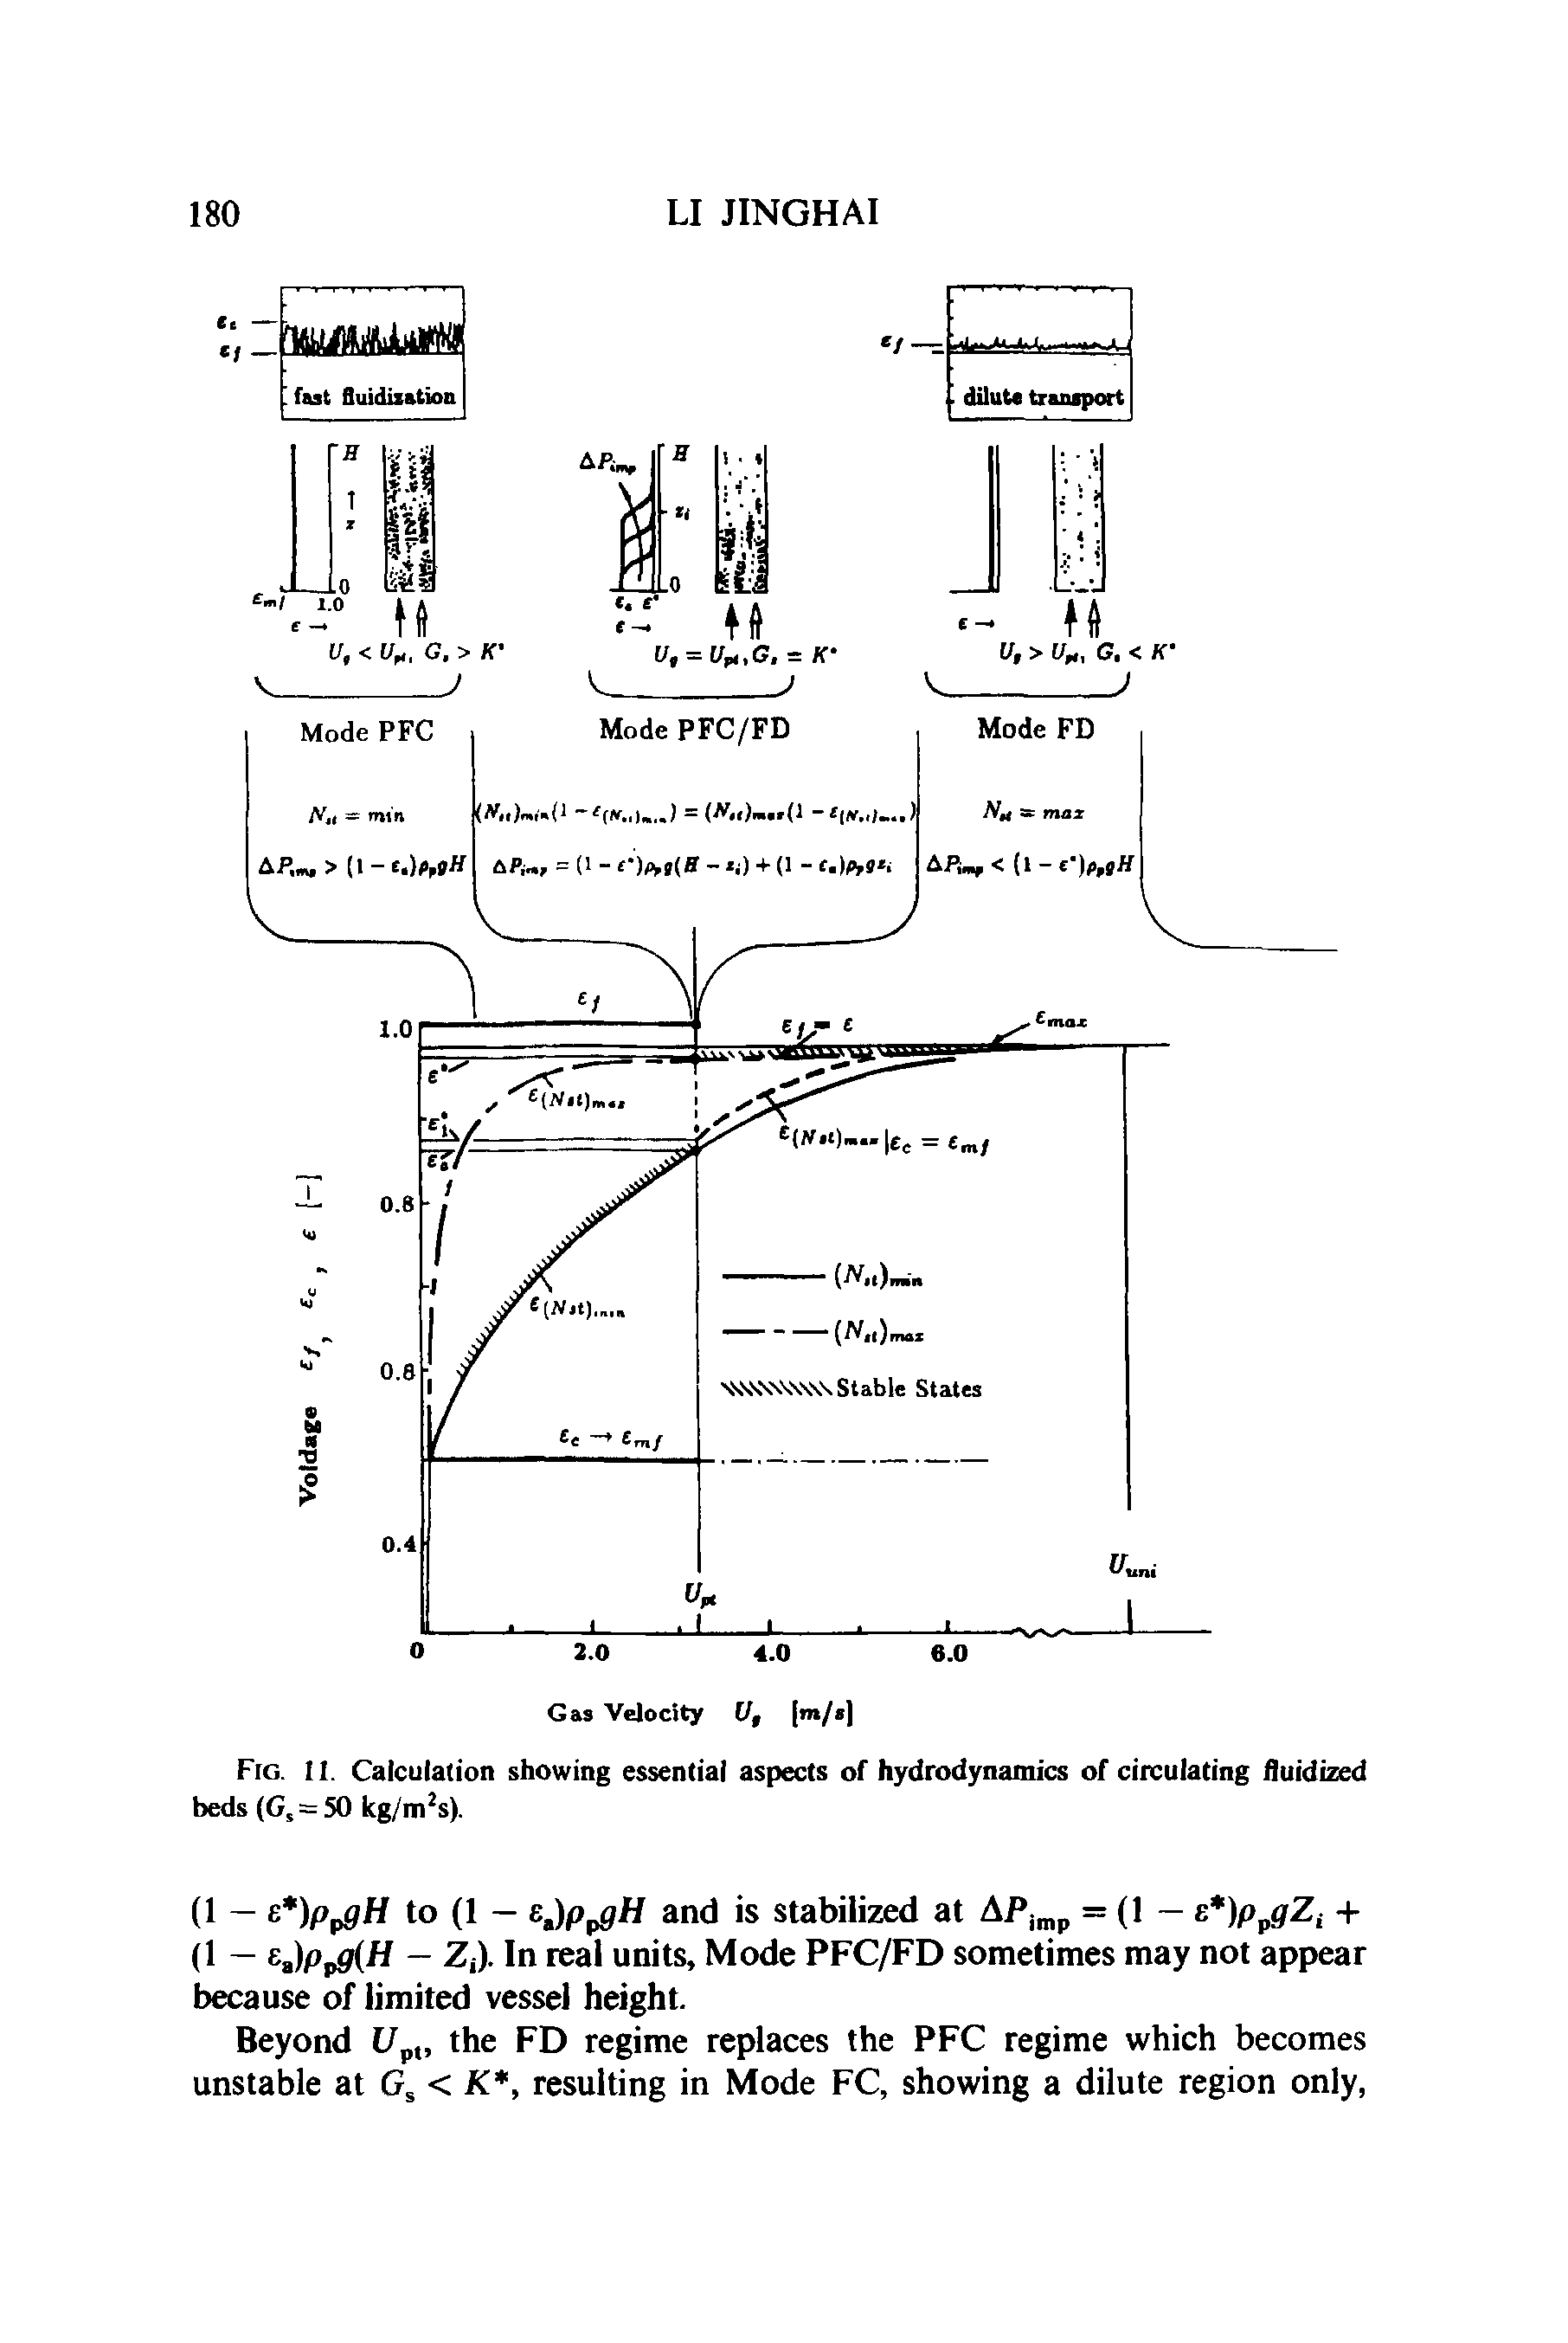 Fig. 11. Calculation showing essential aspects of hydrodynamics of circulating fluidized beds (Gs = 50 kg/m2s).